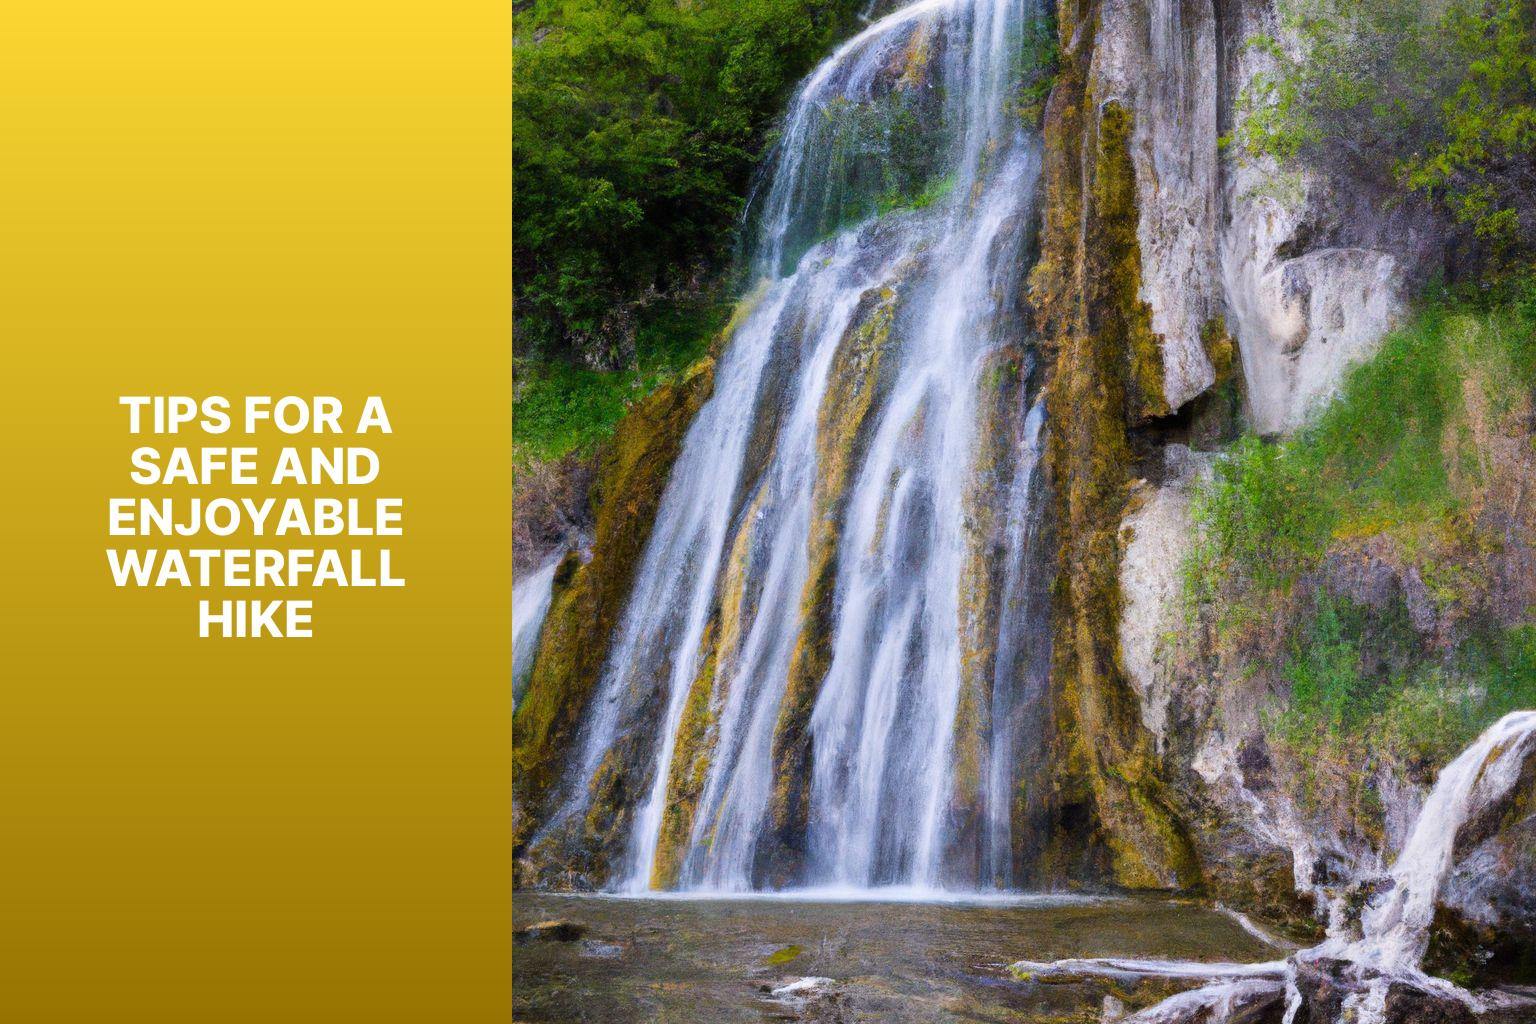 Tips for a Safe and Enjoyable Waterfall Hike - Waterfall Hikes Near Boise 